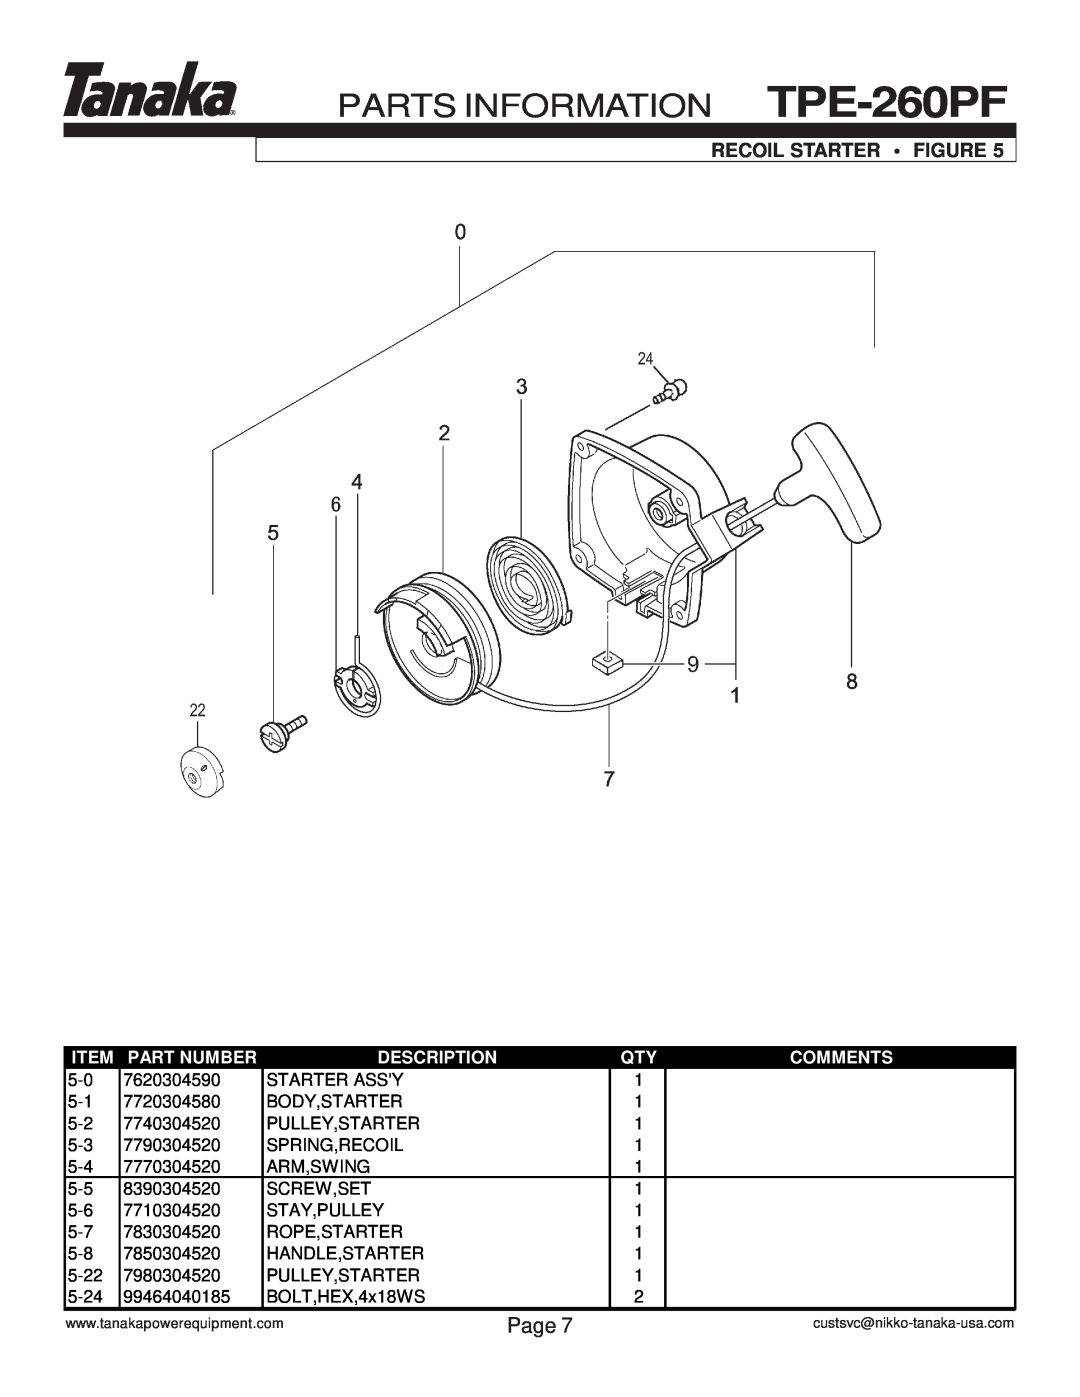 Tanaka manual PARTS INFORMATION TPE-260PF, Recoil Starter Figure, Page, Part Number, Description, Comments 